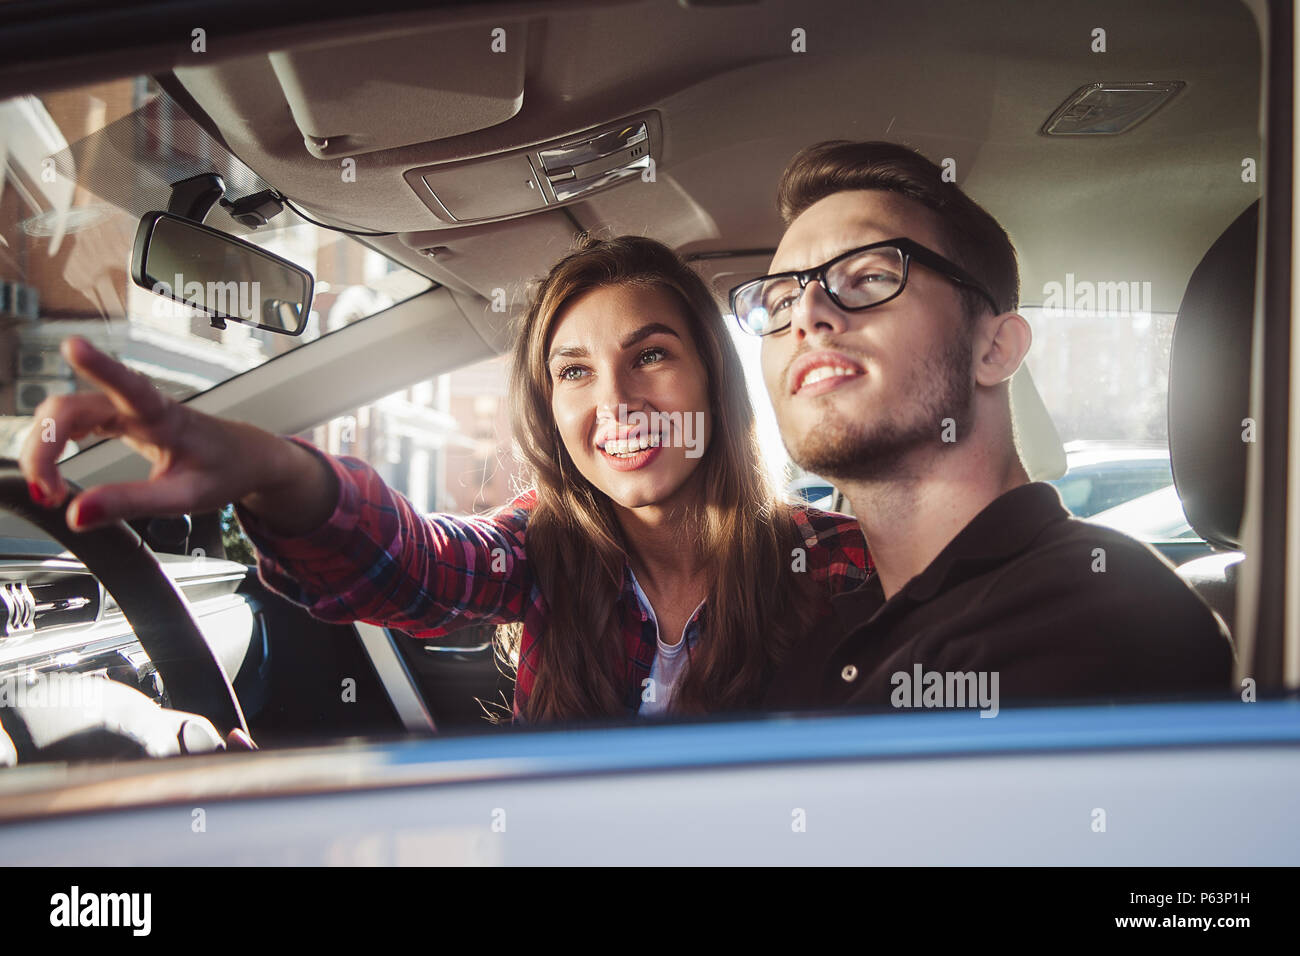 Enjoying travel. Beautiful young couple sitting on the front passenger seats and smiling while handsome man driving a car. Stock Photo